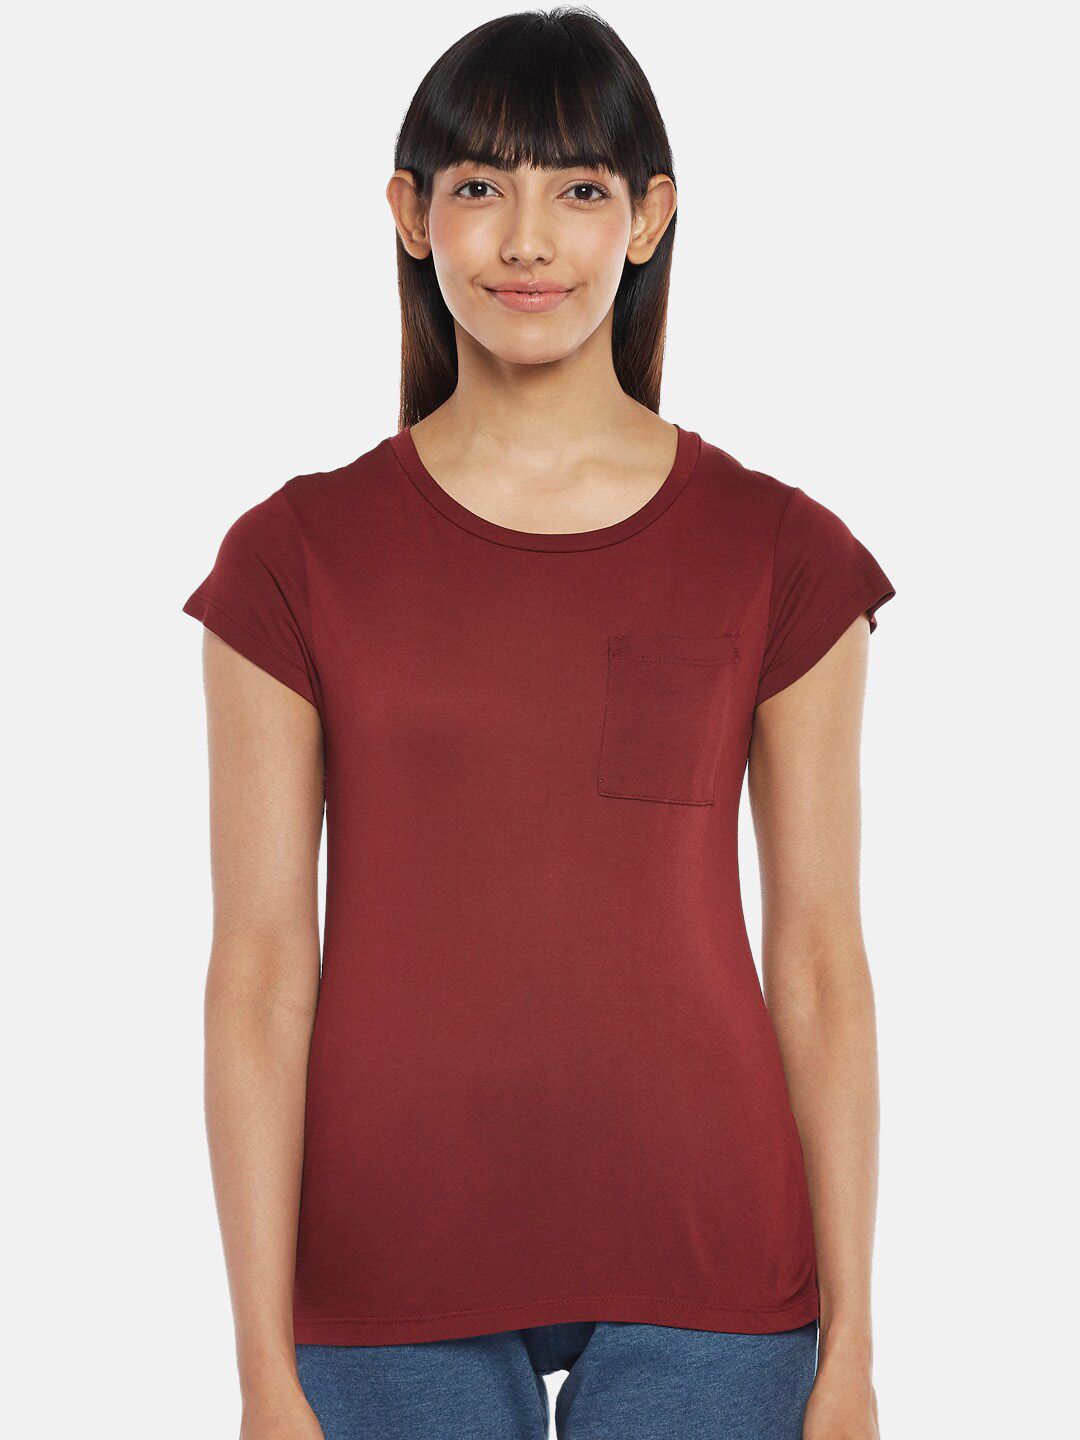 Dreamz by Pantaloons Women Brown Solid Lounge T-shirt Price in India